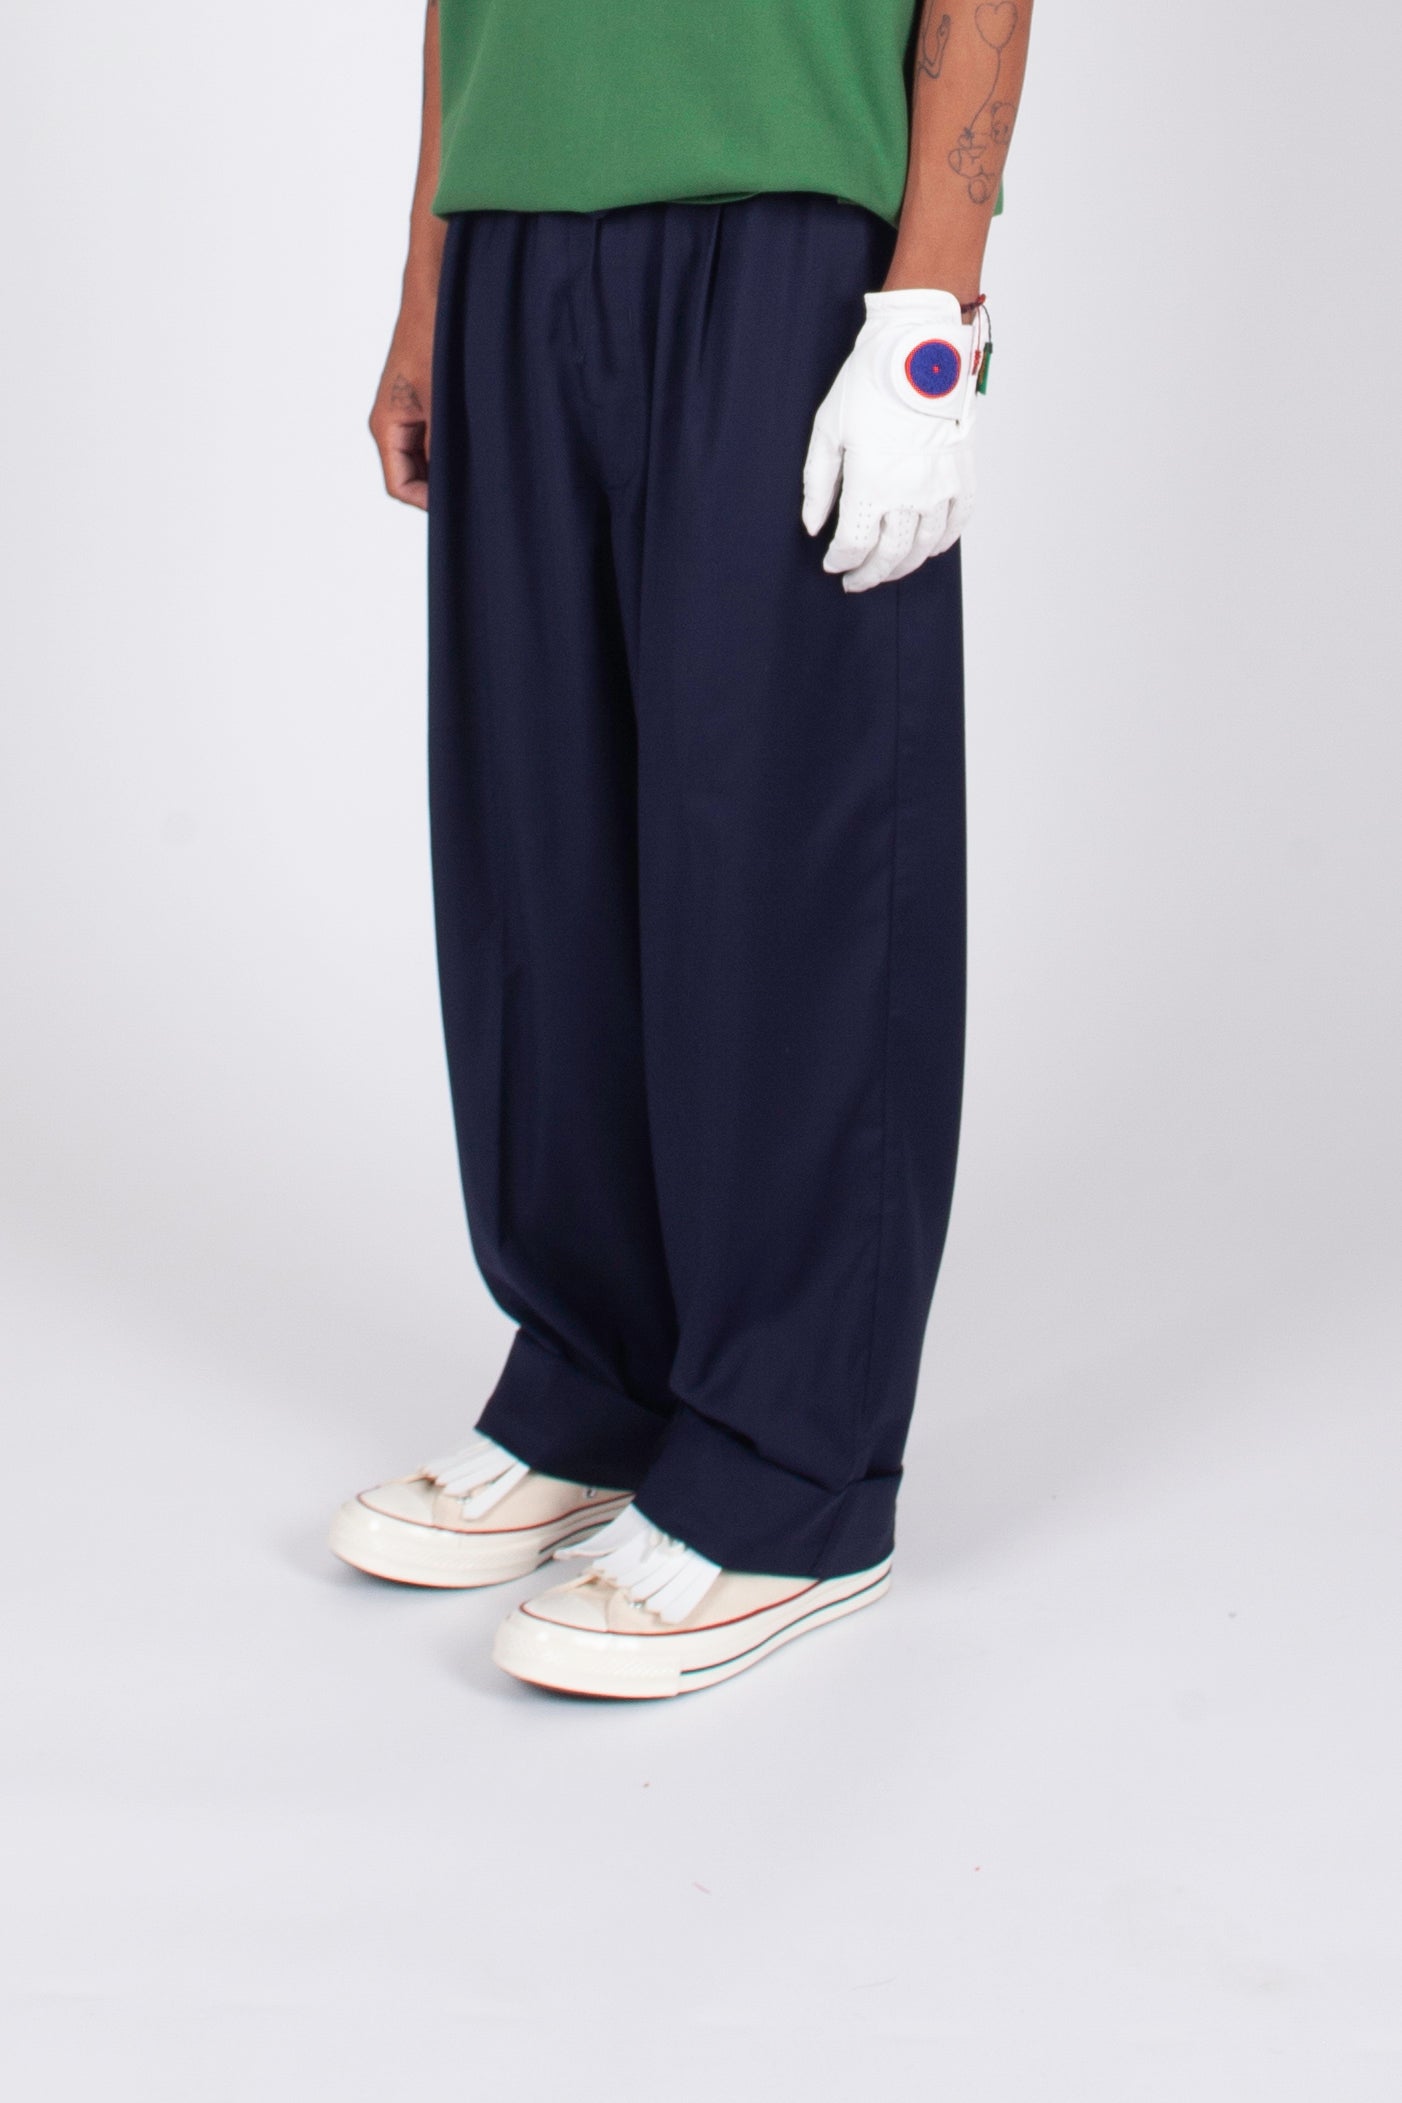 loose fit golf trouser